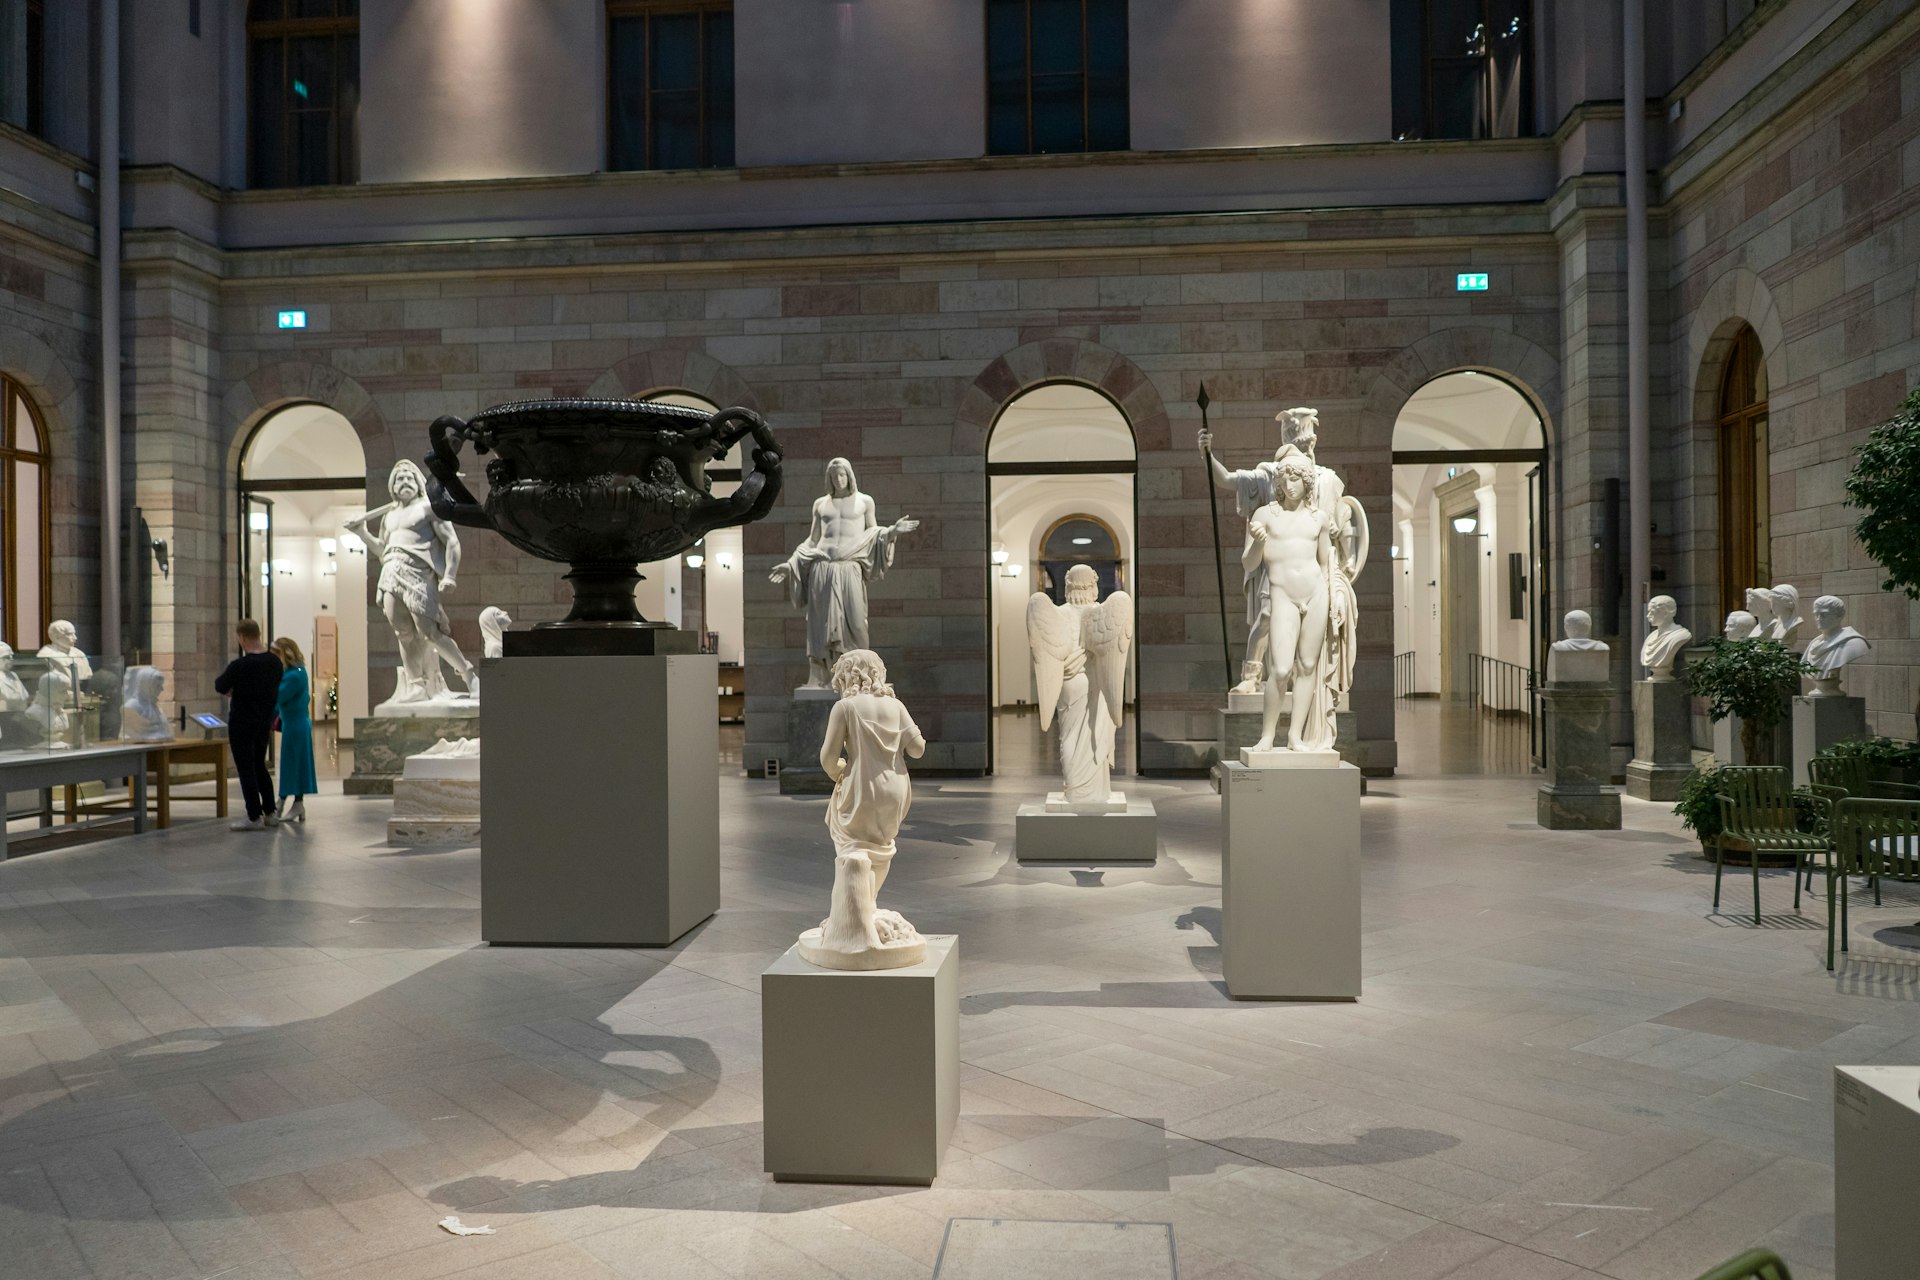 Dramatically lit sculptures in a gallery by night at the Nationalmuseum in Stockholm